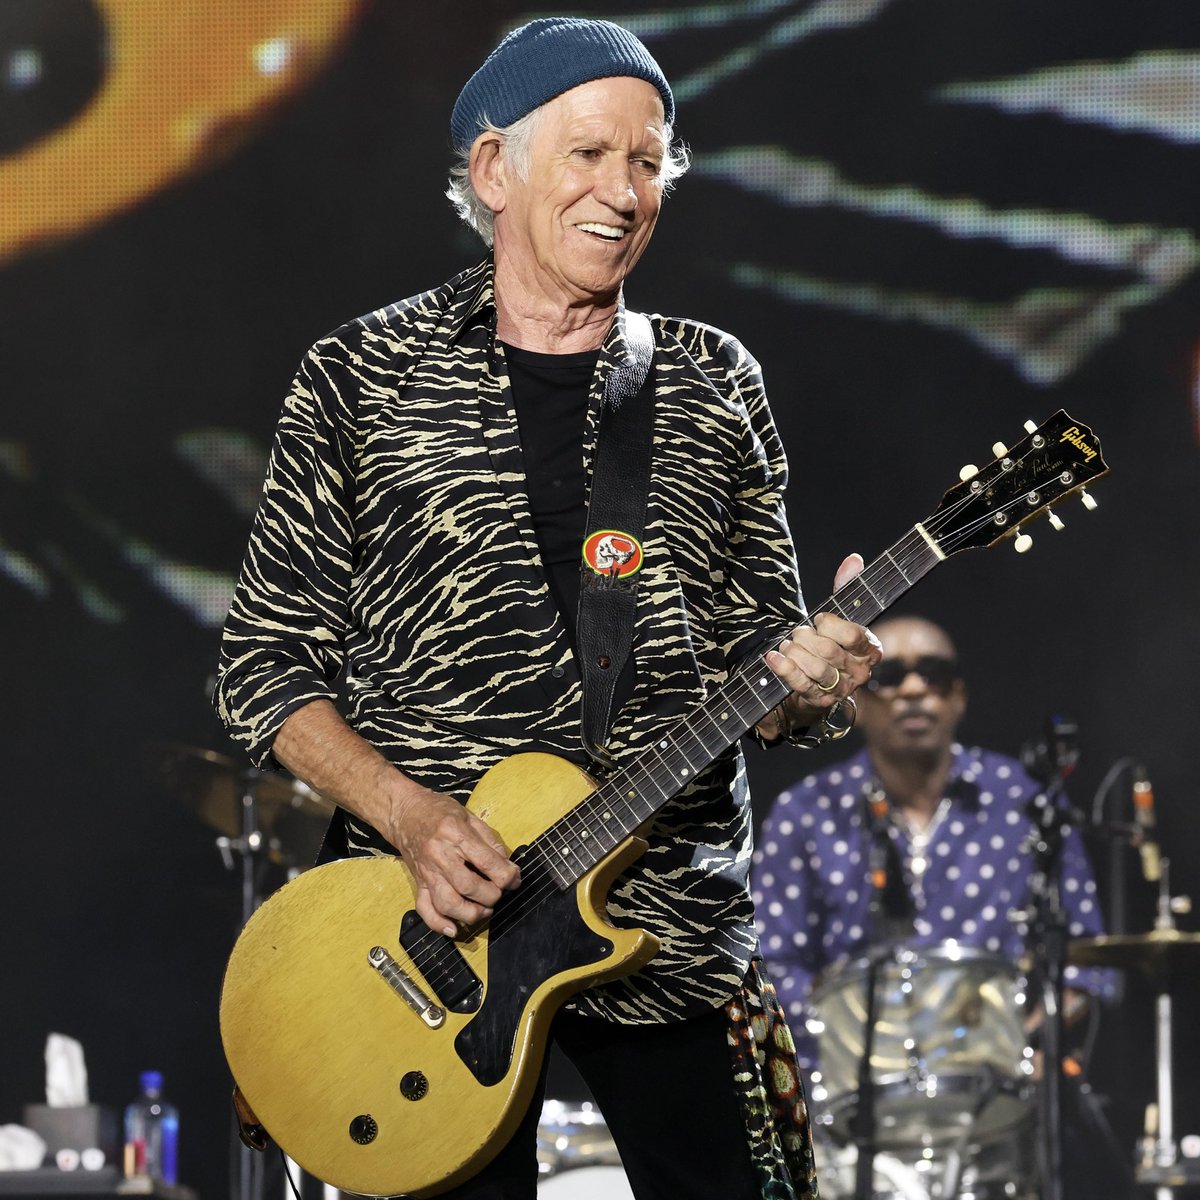 The Stones kicked off the Hackney Diamonds Tour Sunday night in Houston. Can’t wait to see it for ourselves on May 30! Will you be there? Limited side view seats just released: bit.ly/3T6viYd 📷: Kevin Mazur/Getty Images